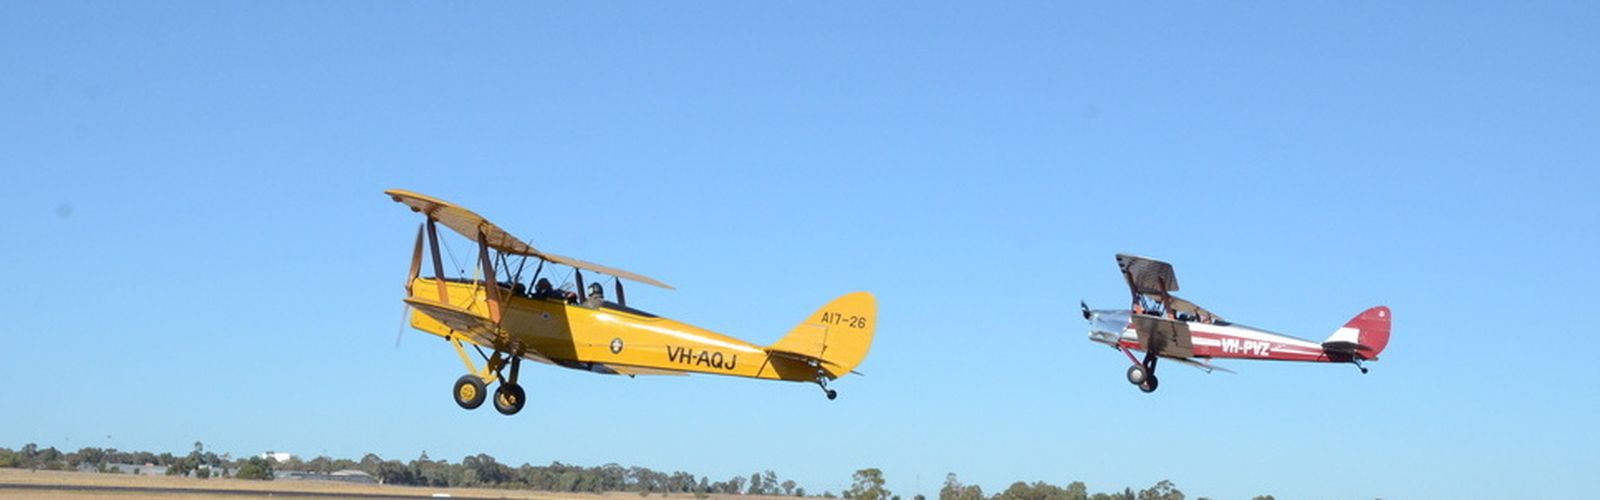 Vintage aircraft takes off at Dubbo